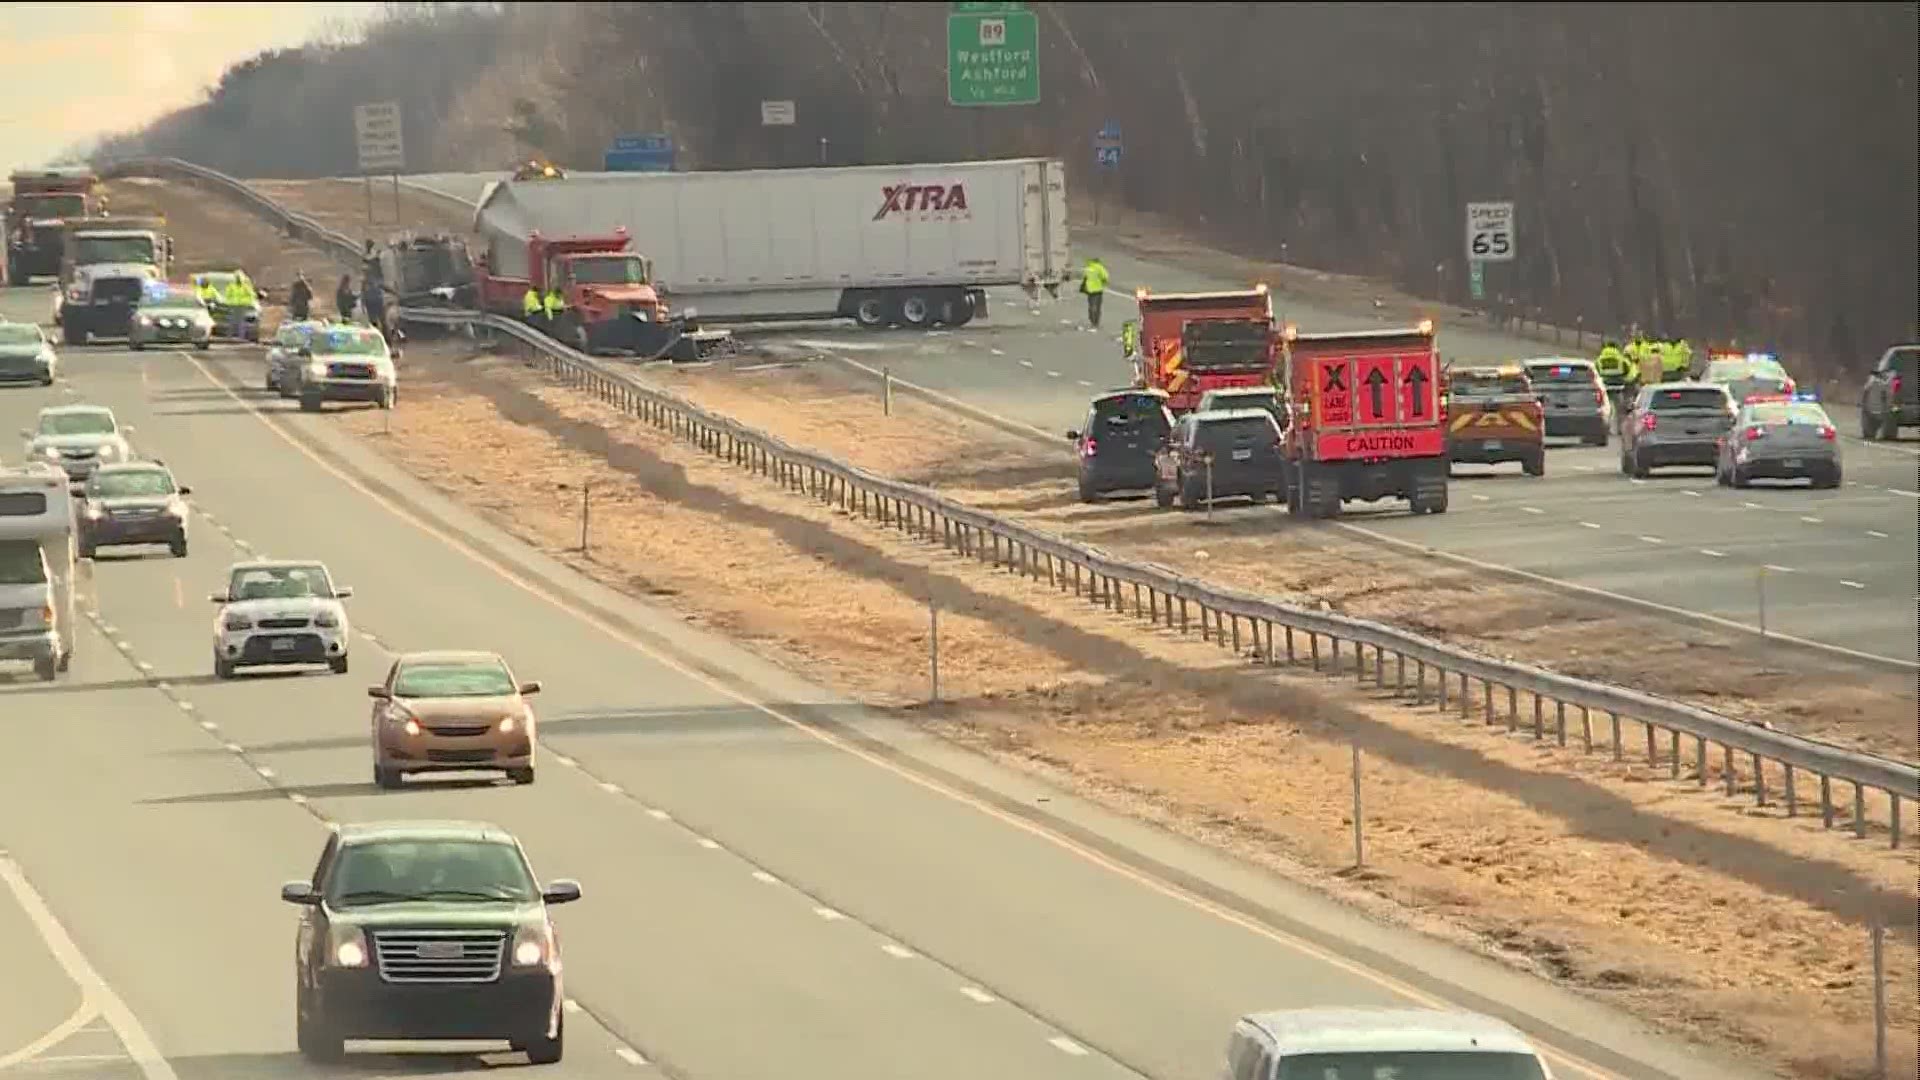 Tractor-trailer crashed into DOT truck